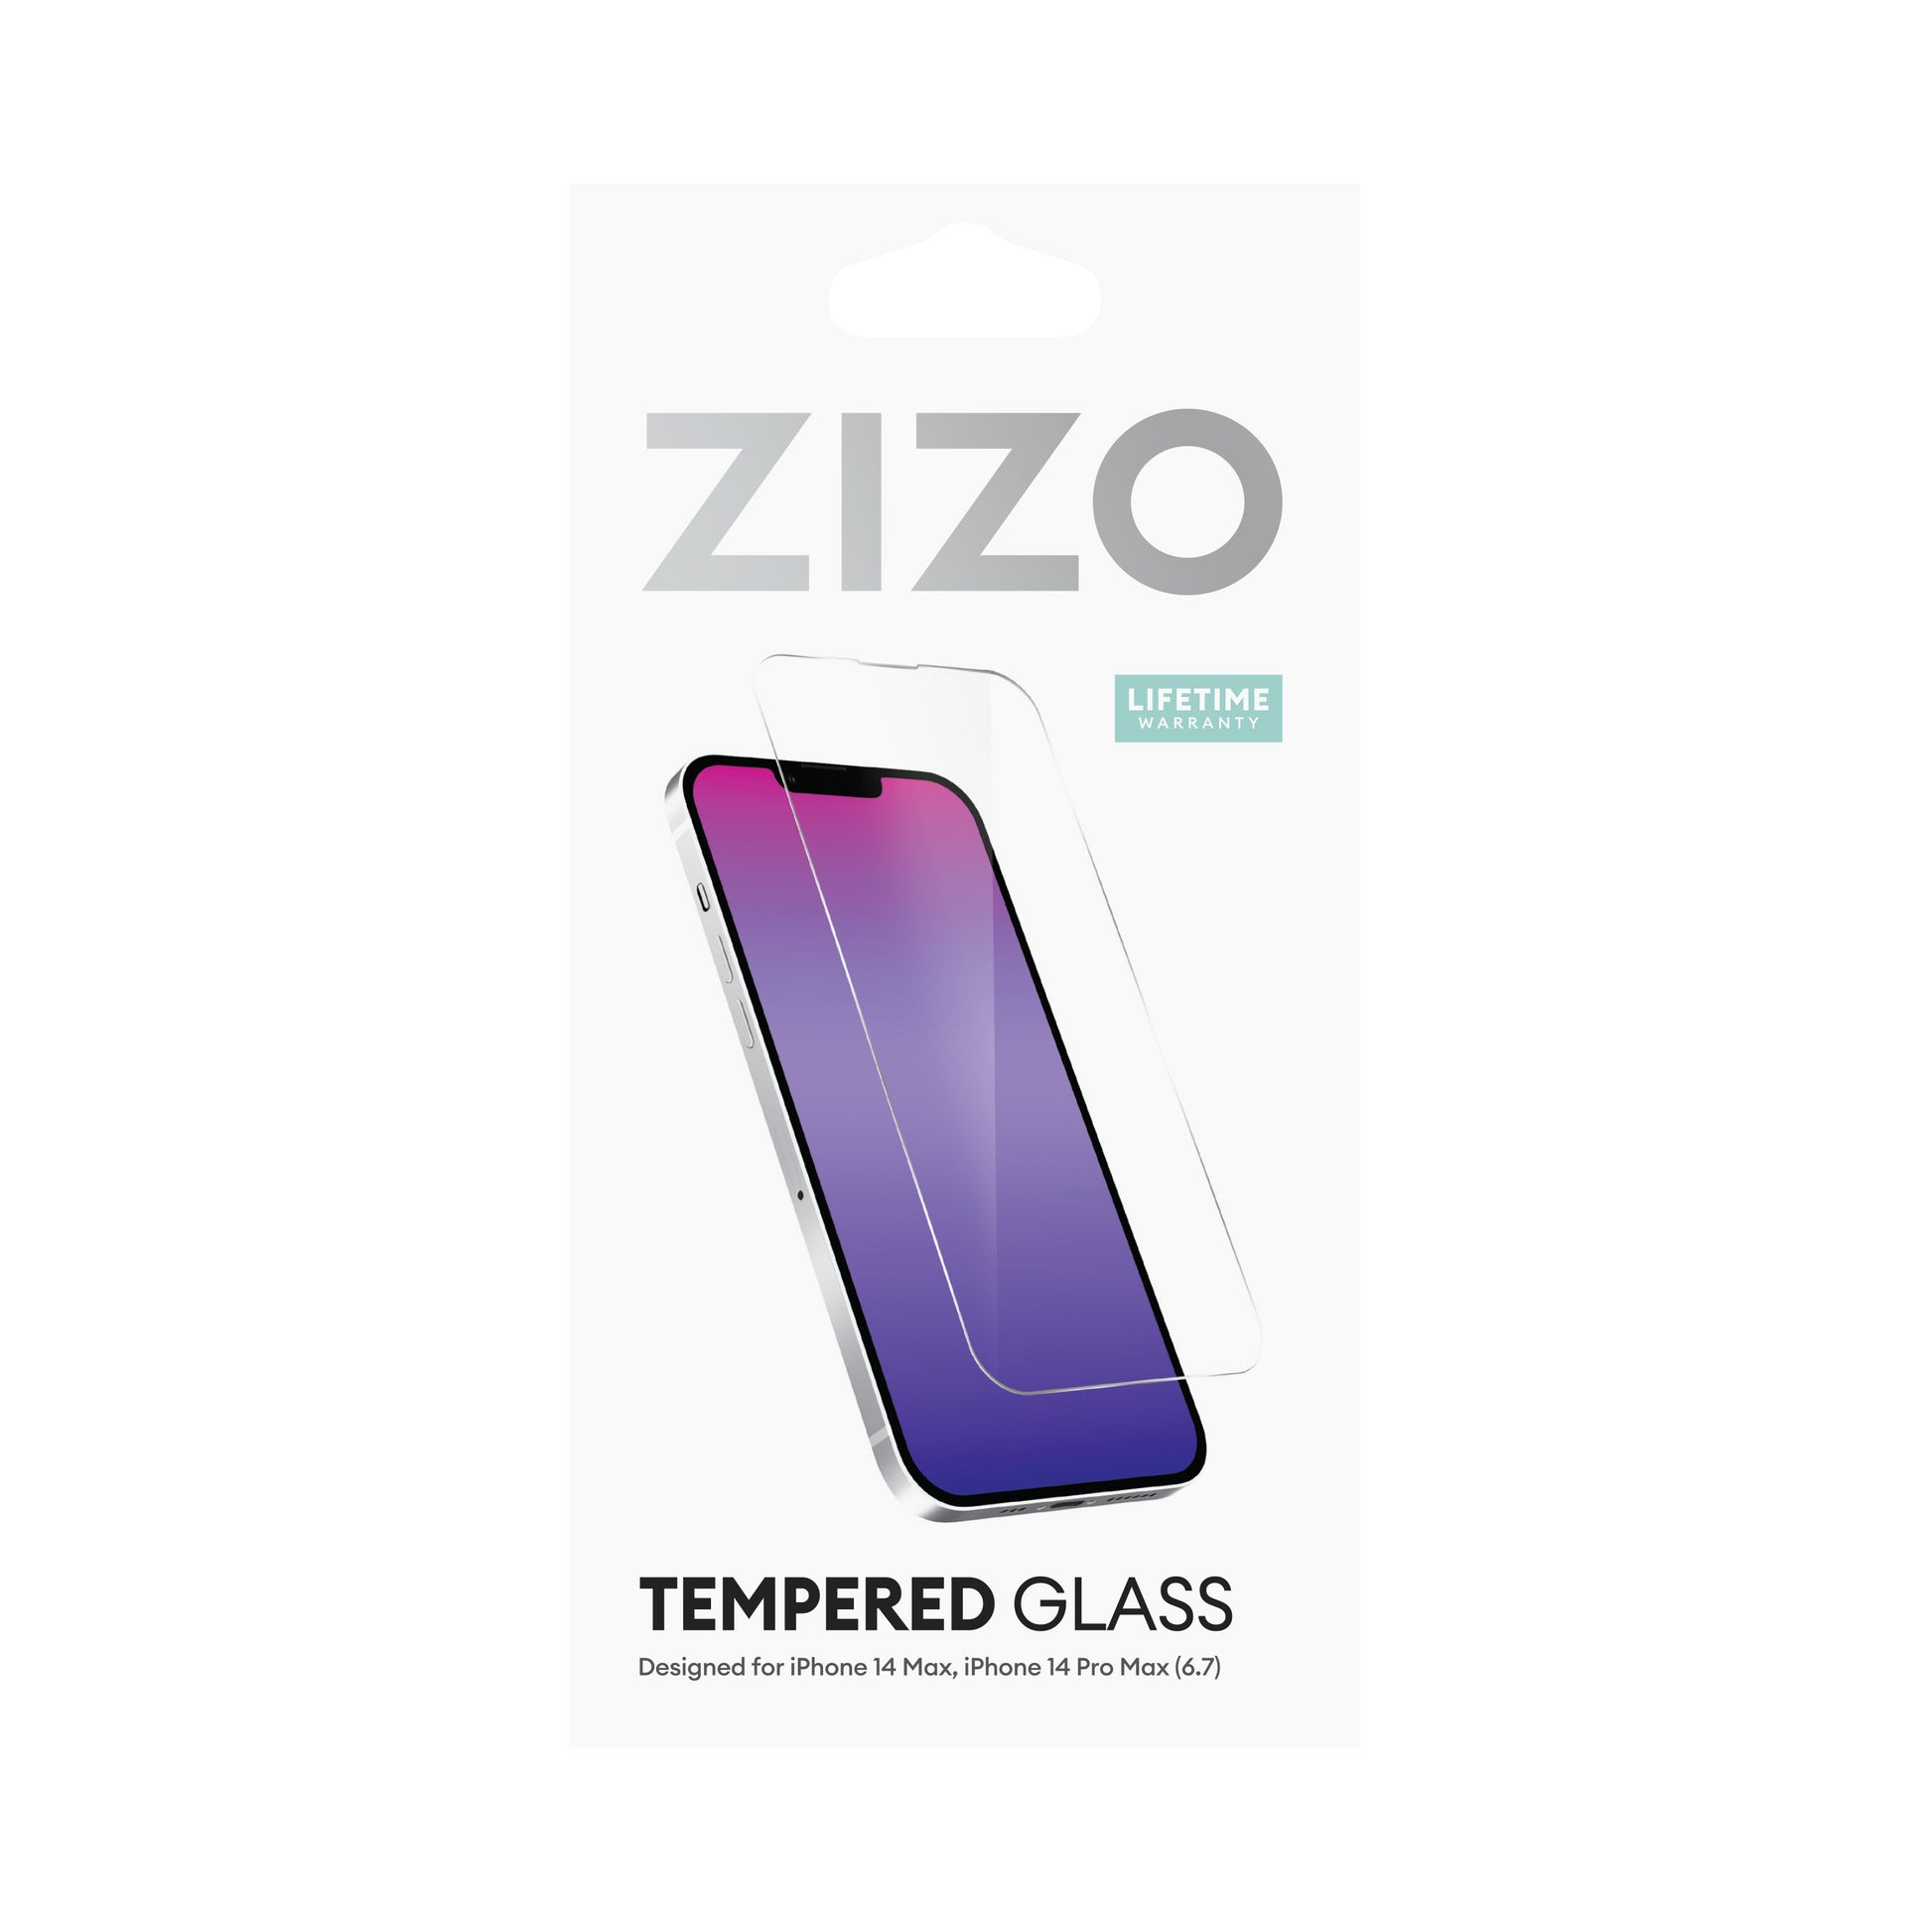 ZIZO TEMPERED GLASS Screen Protector for iPhone 14 Plus / Pro Max (6.7) - Clear